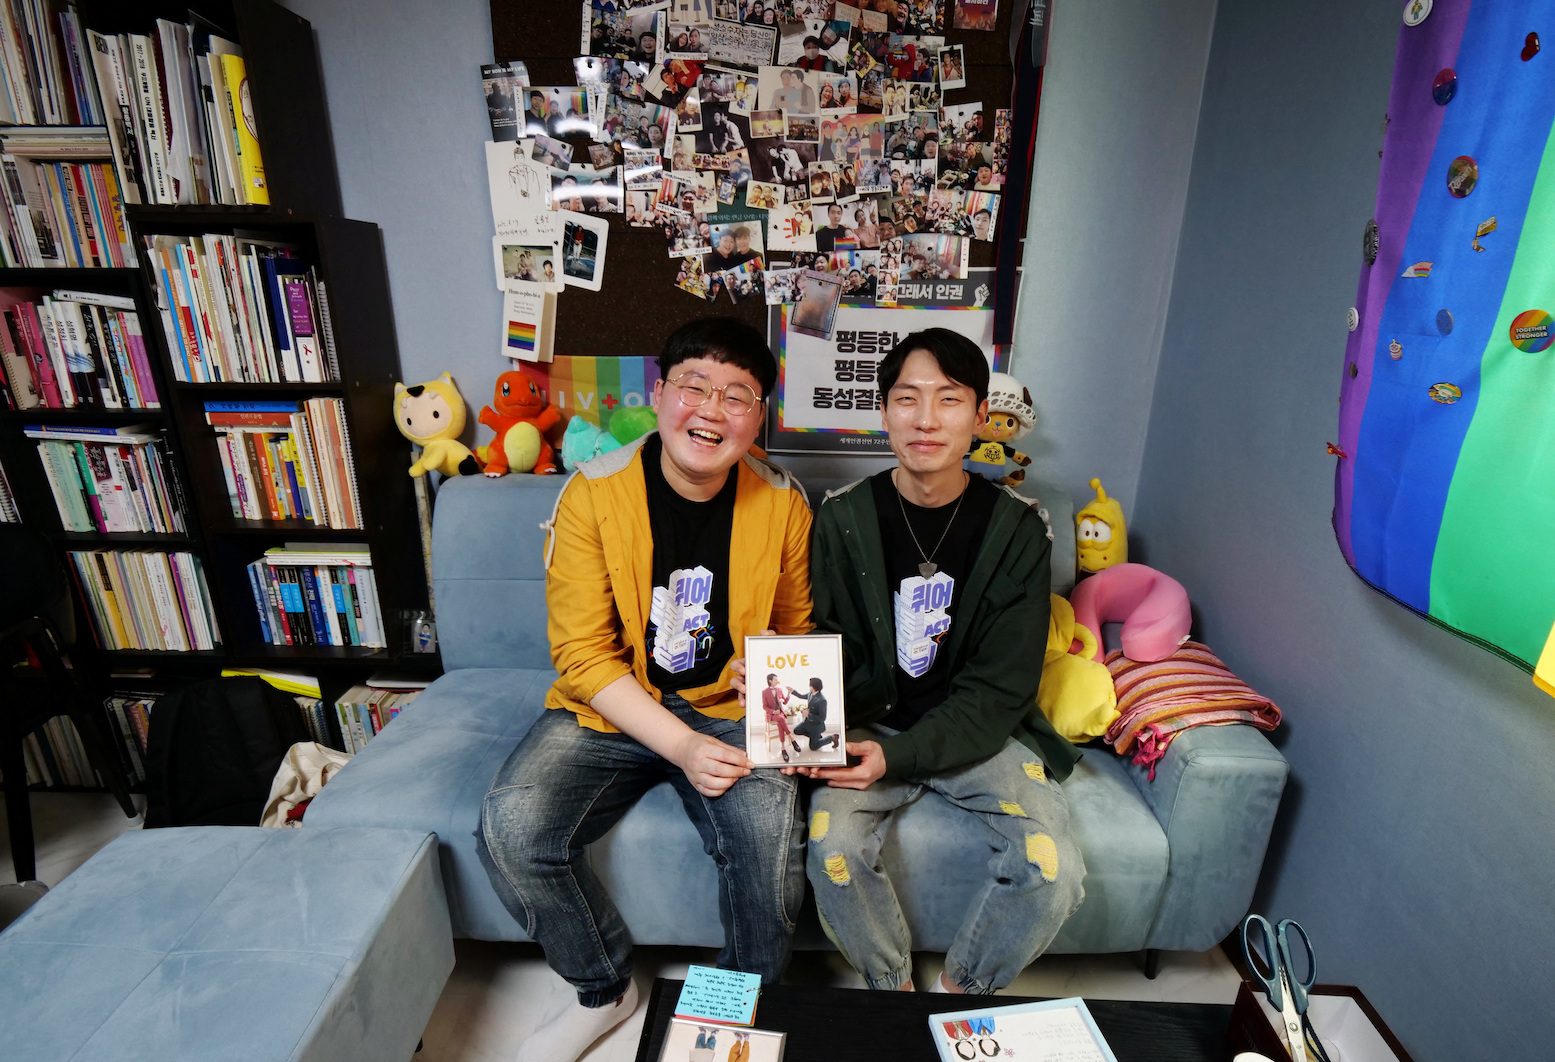 South Korean gay couple sees court win as breakthrough for equality